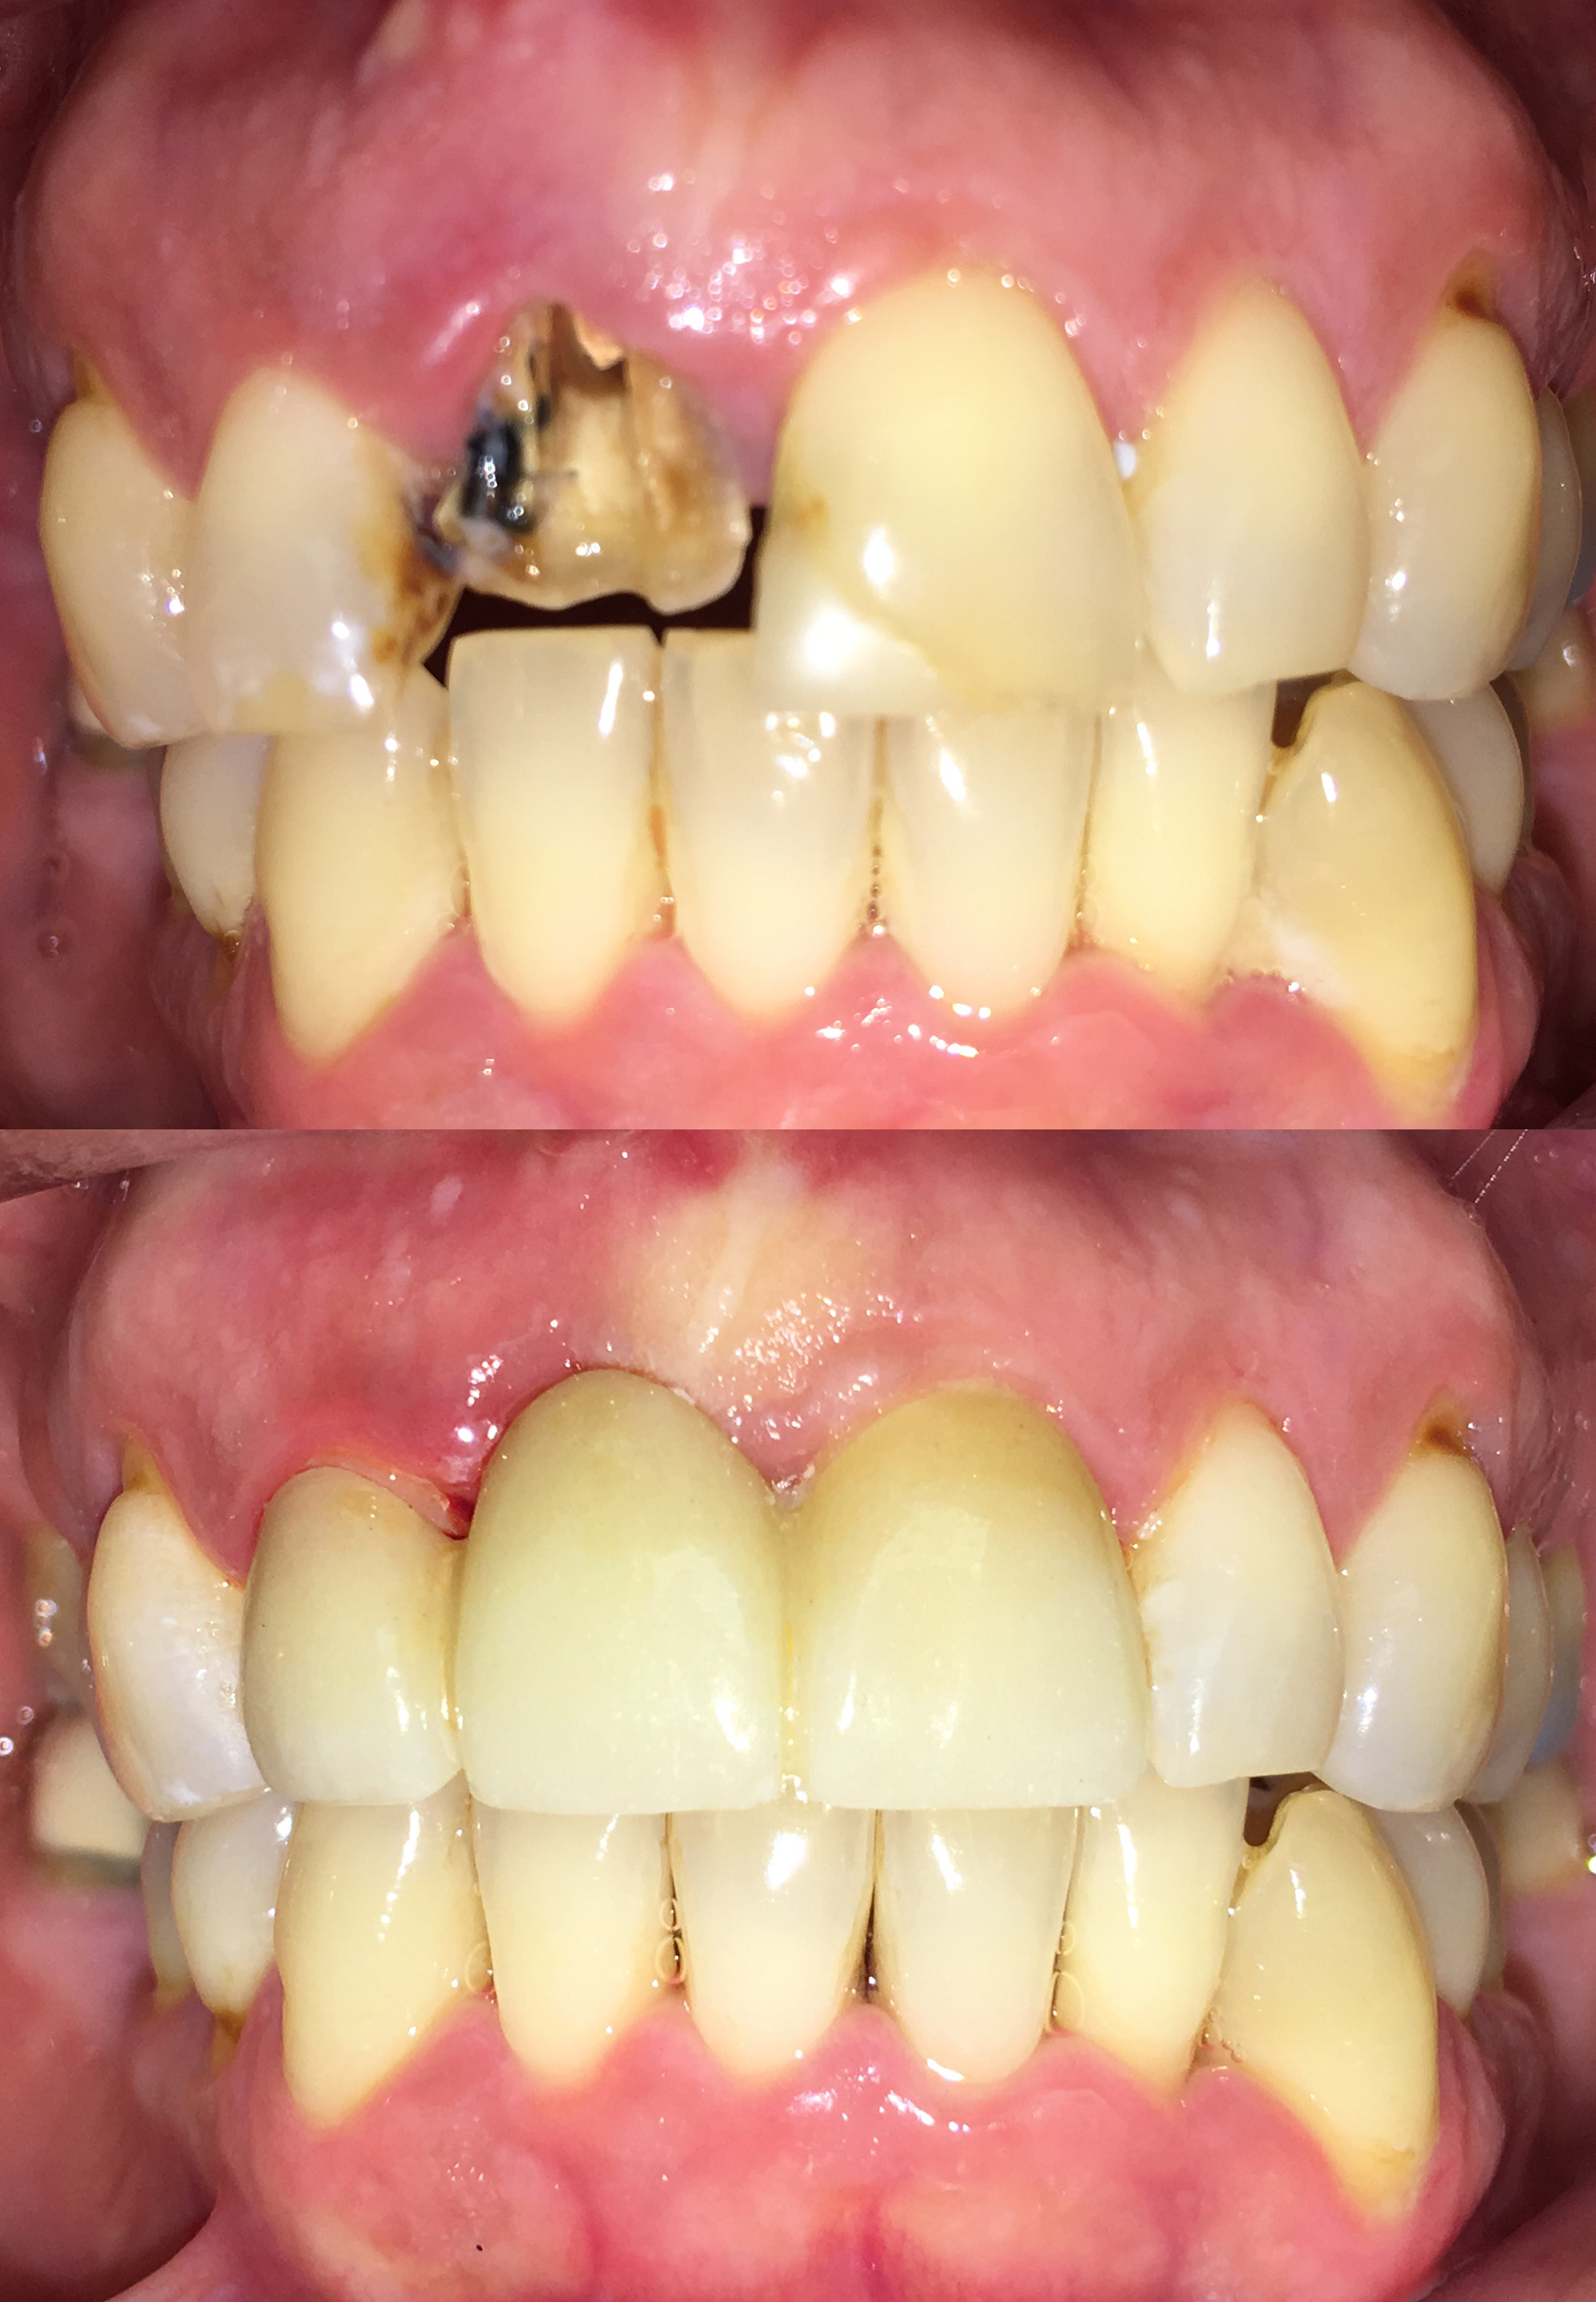 Extraction and bridge to replace missing tooth